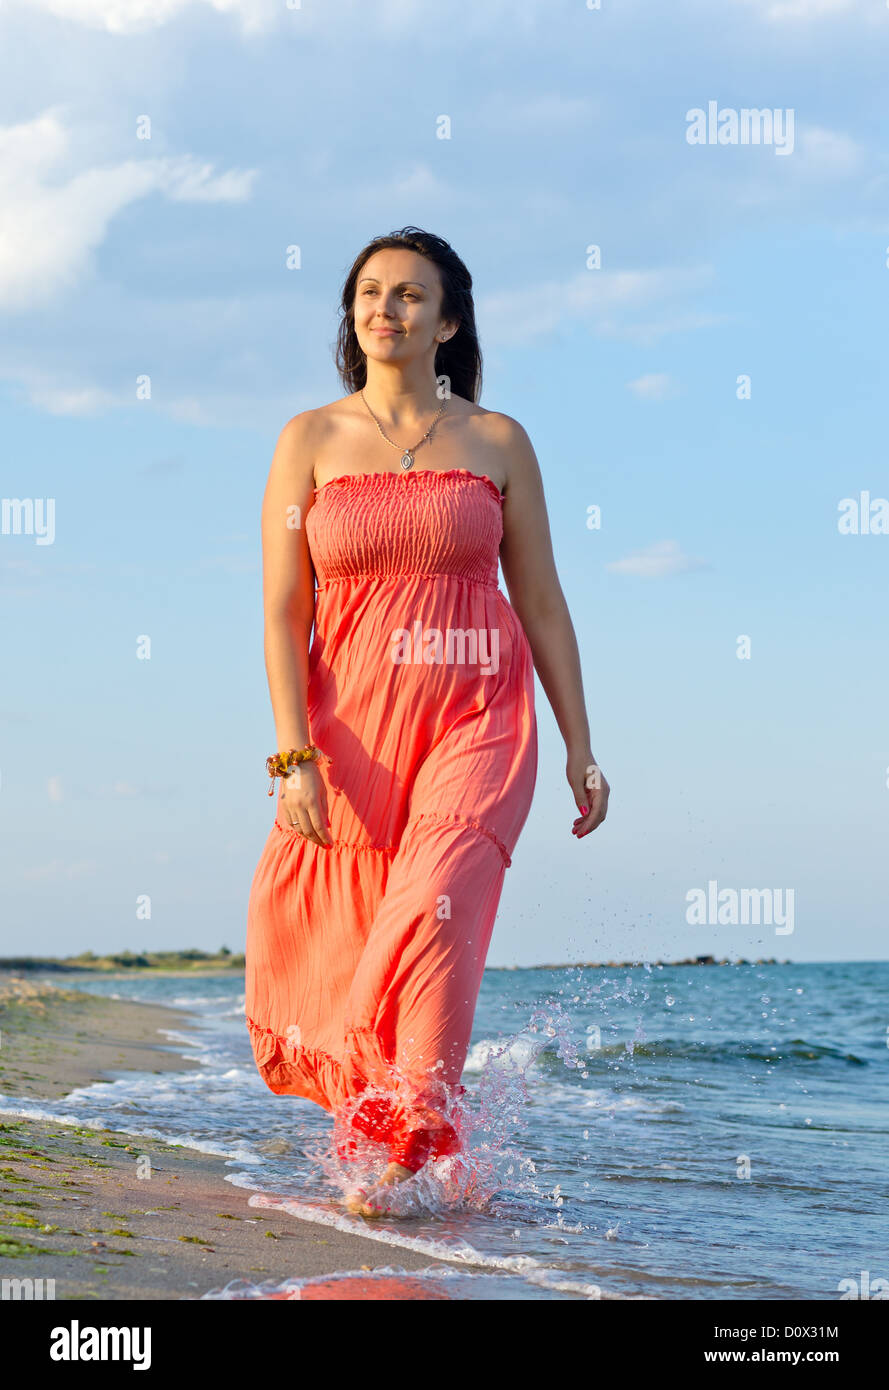 Attractive middle-aged woman in a long orange summer dress walking through surf at the edge of a beach in summer sunshine Stock Photo